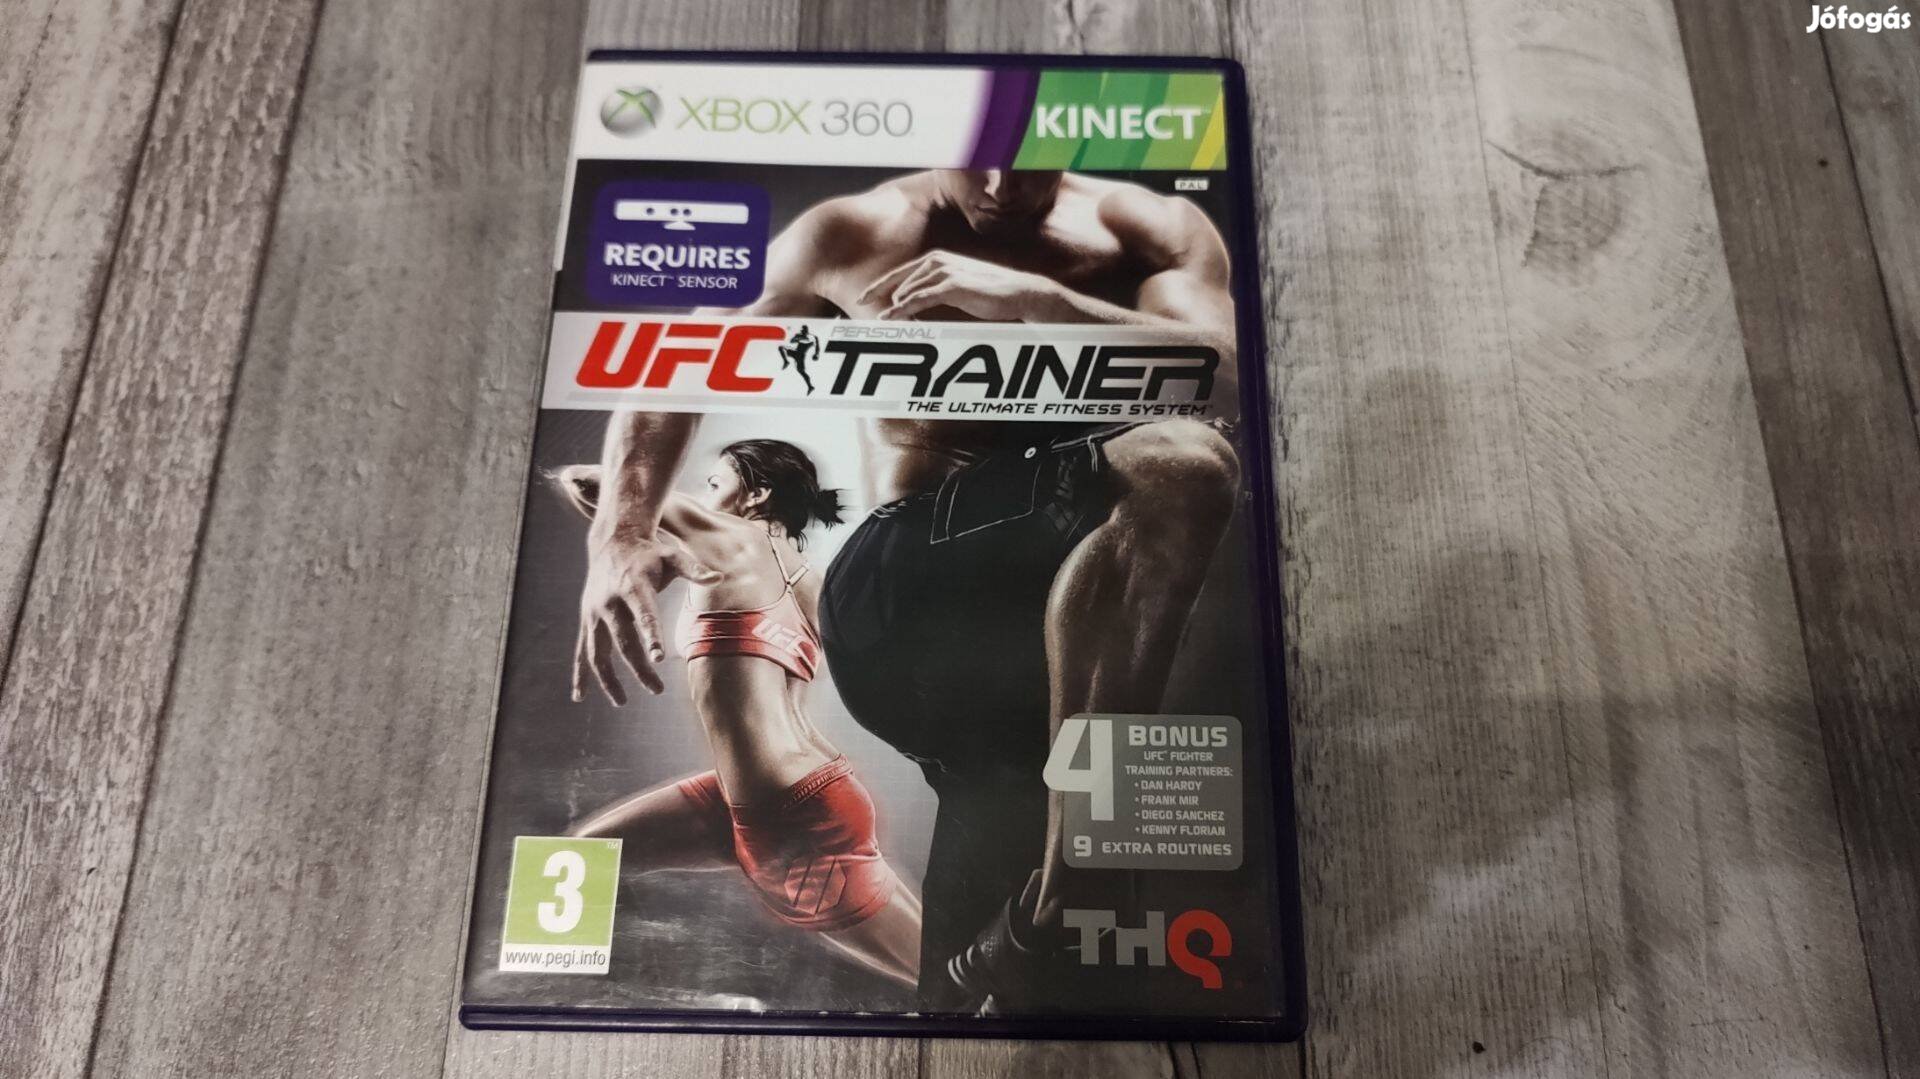 Top Xbox 360 : Kinect UFC Personal Trainer The Ultimate Fitness System